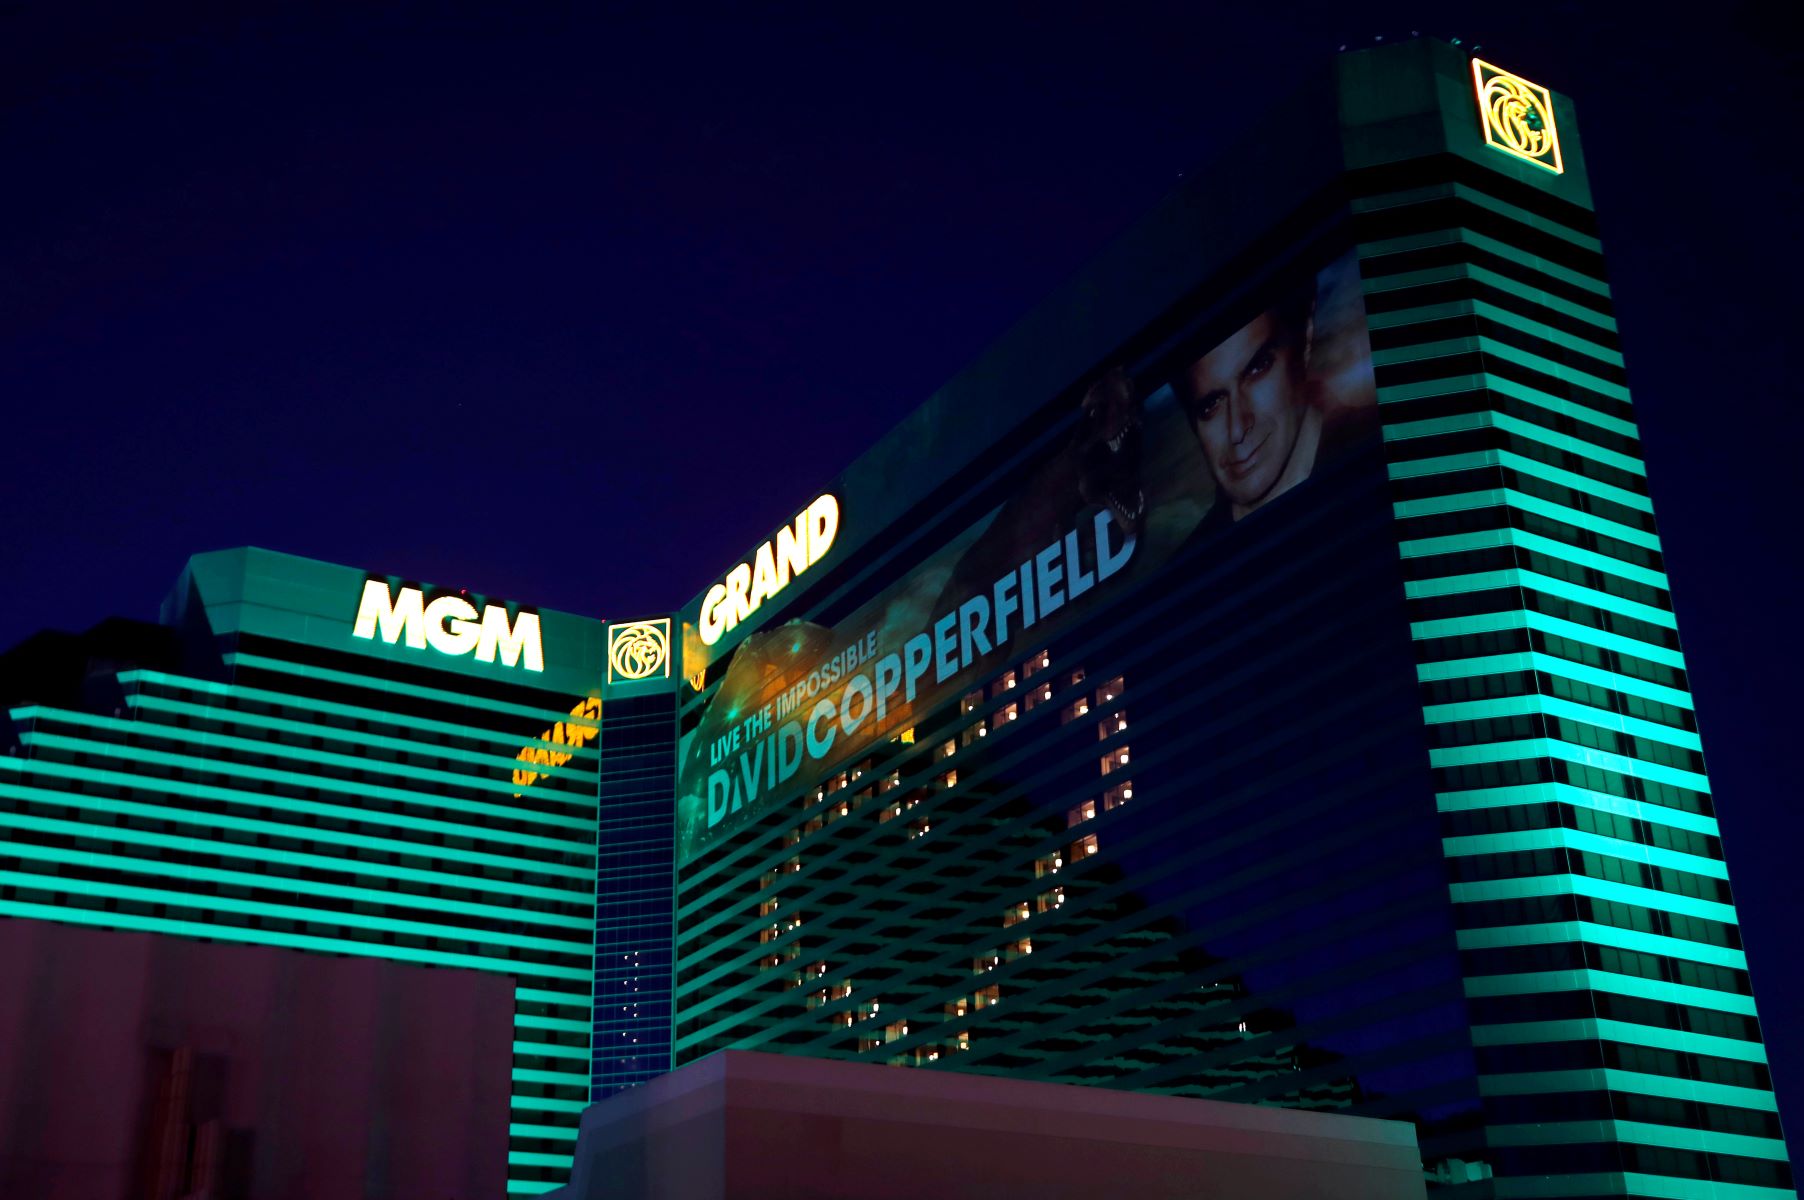 New Cyberattack Hits Las Vegas MGM Casinos, Causing Weekend Chaos